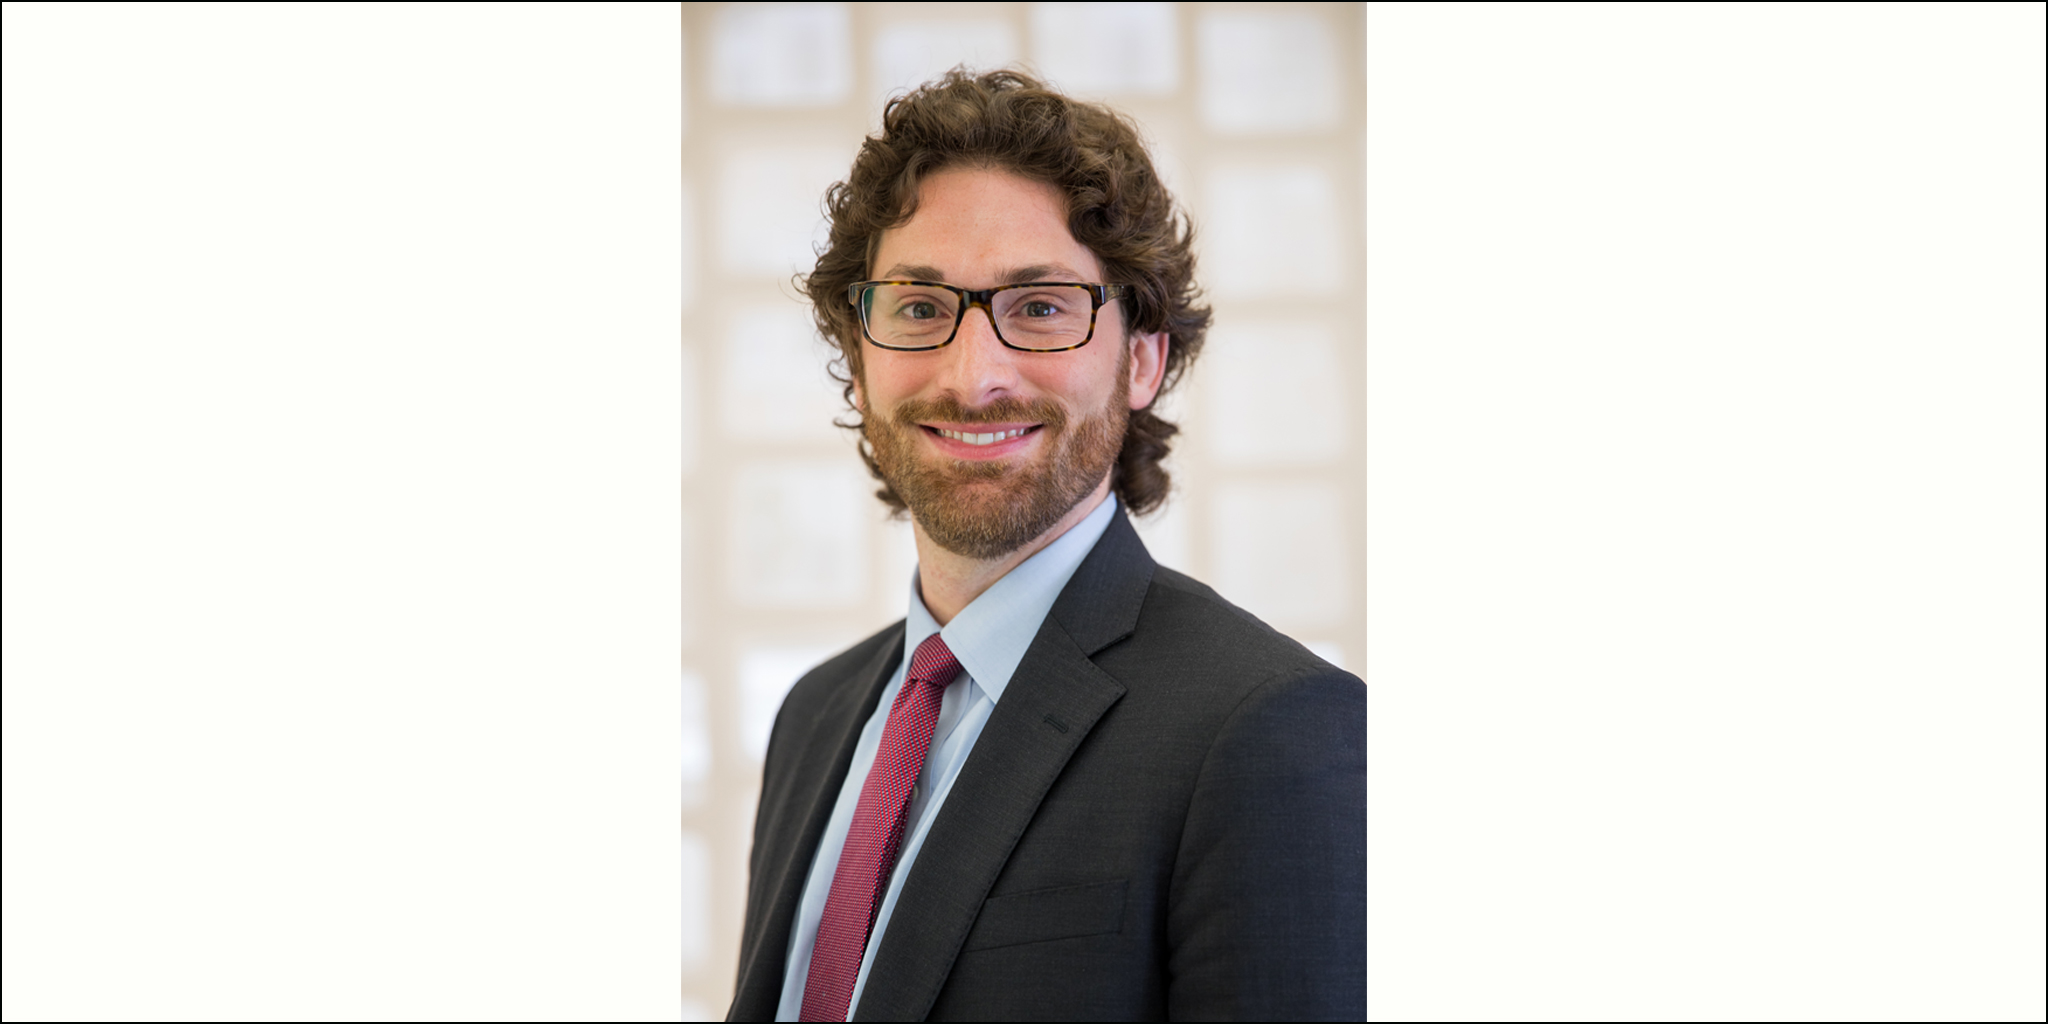 Jonathan Gagliardi Appointed New Assistant Vice President for Strategy, Policy, and Analytics